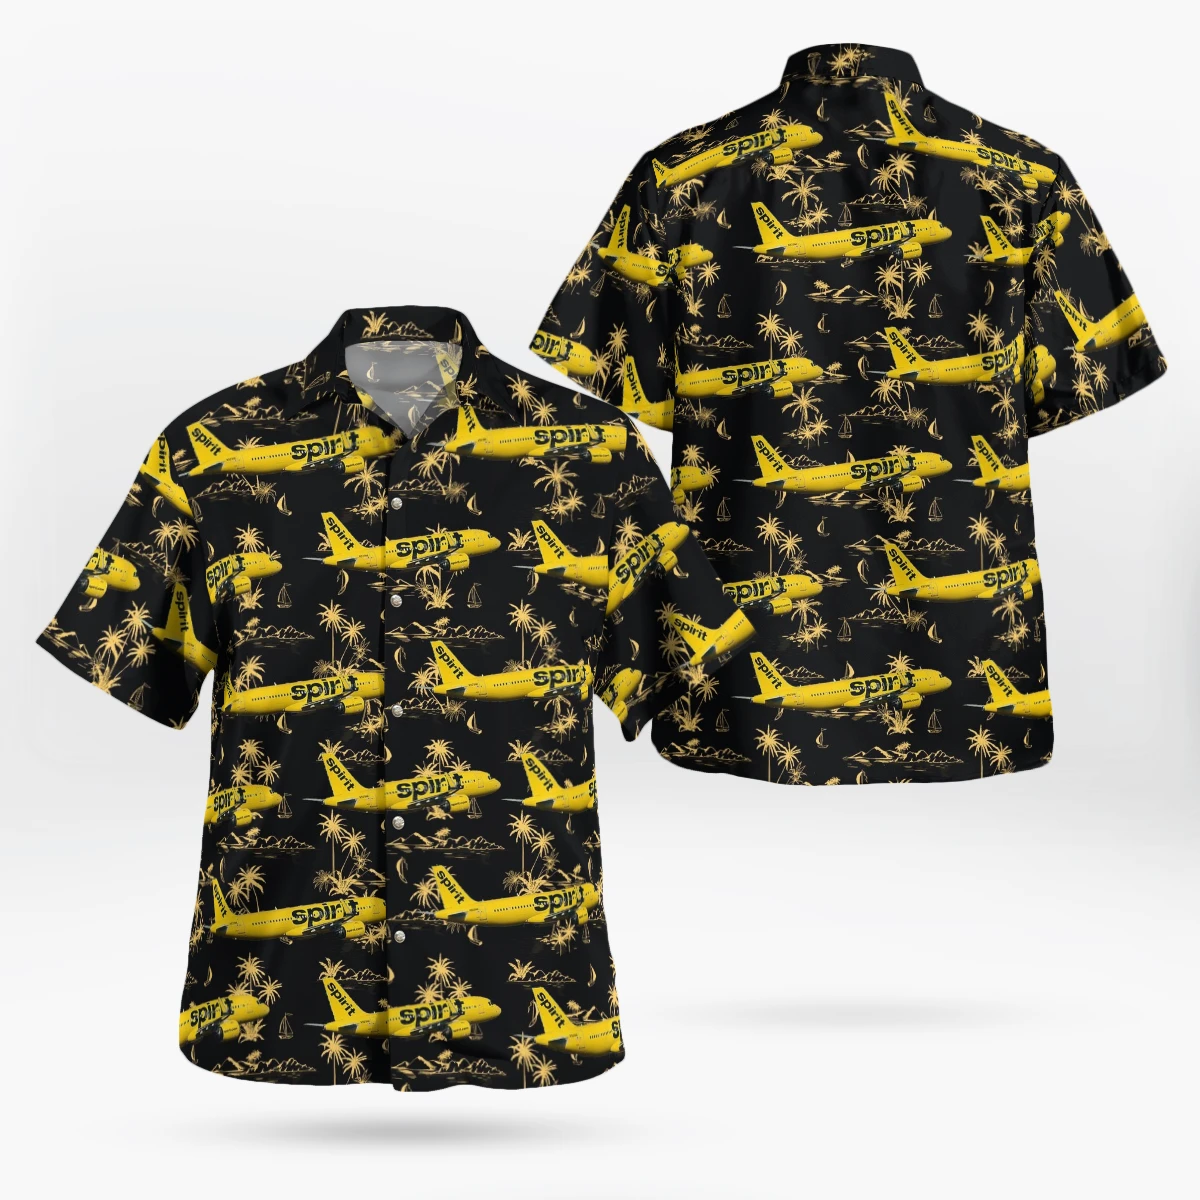 Consider getting these Hawaiian Shirt for your friends 247